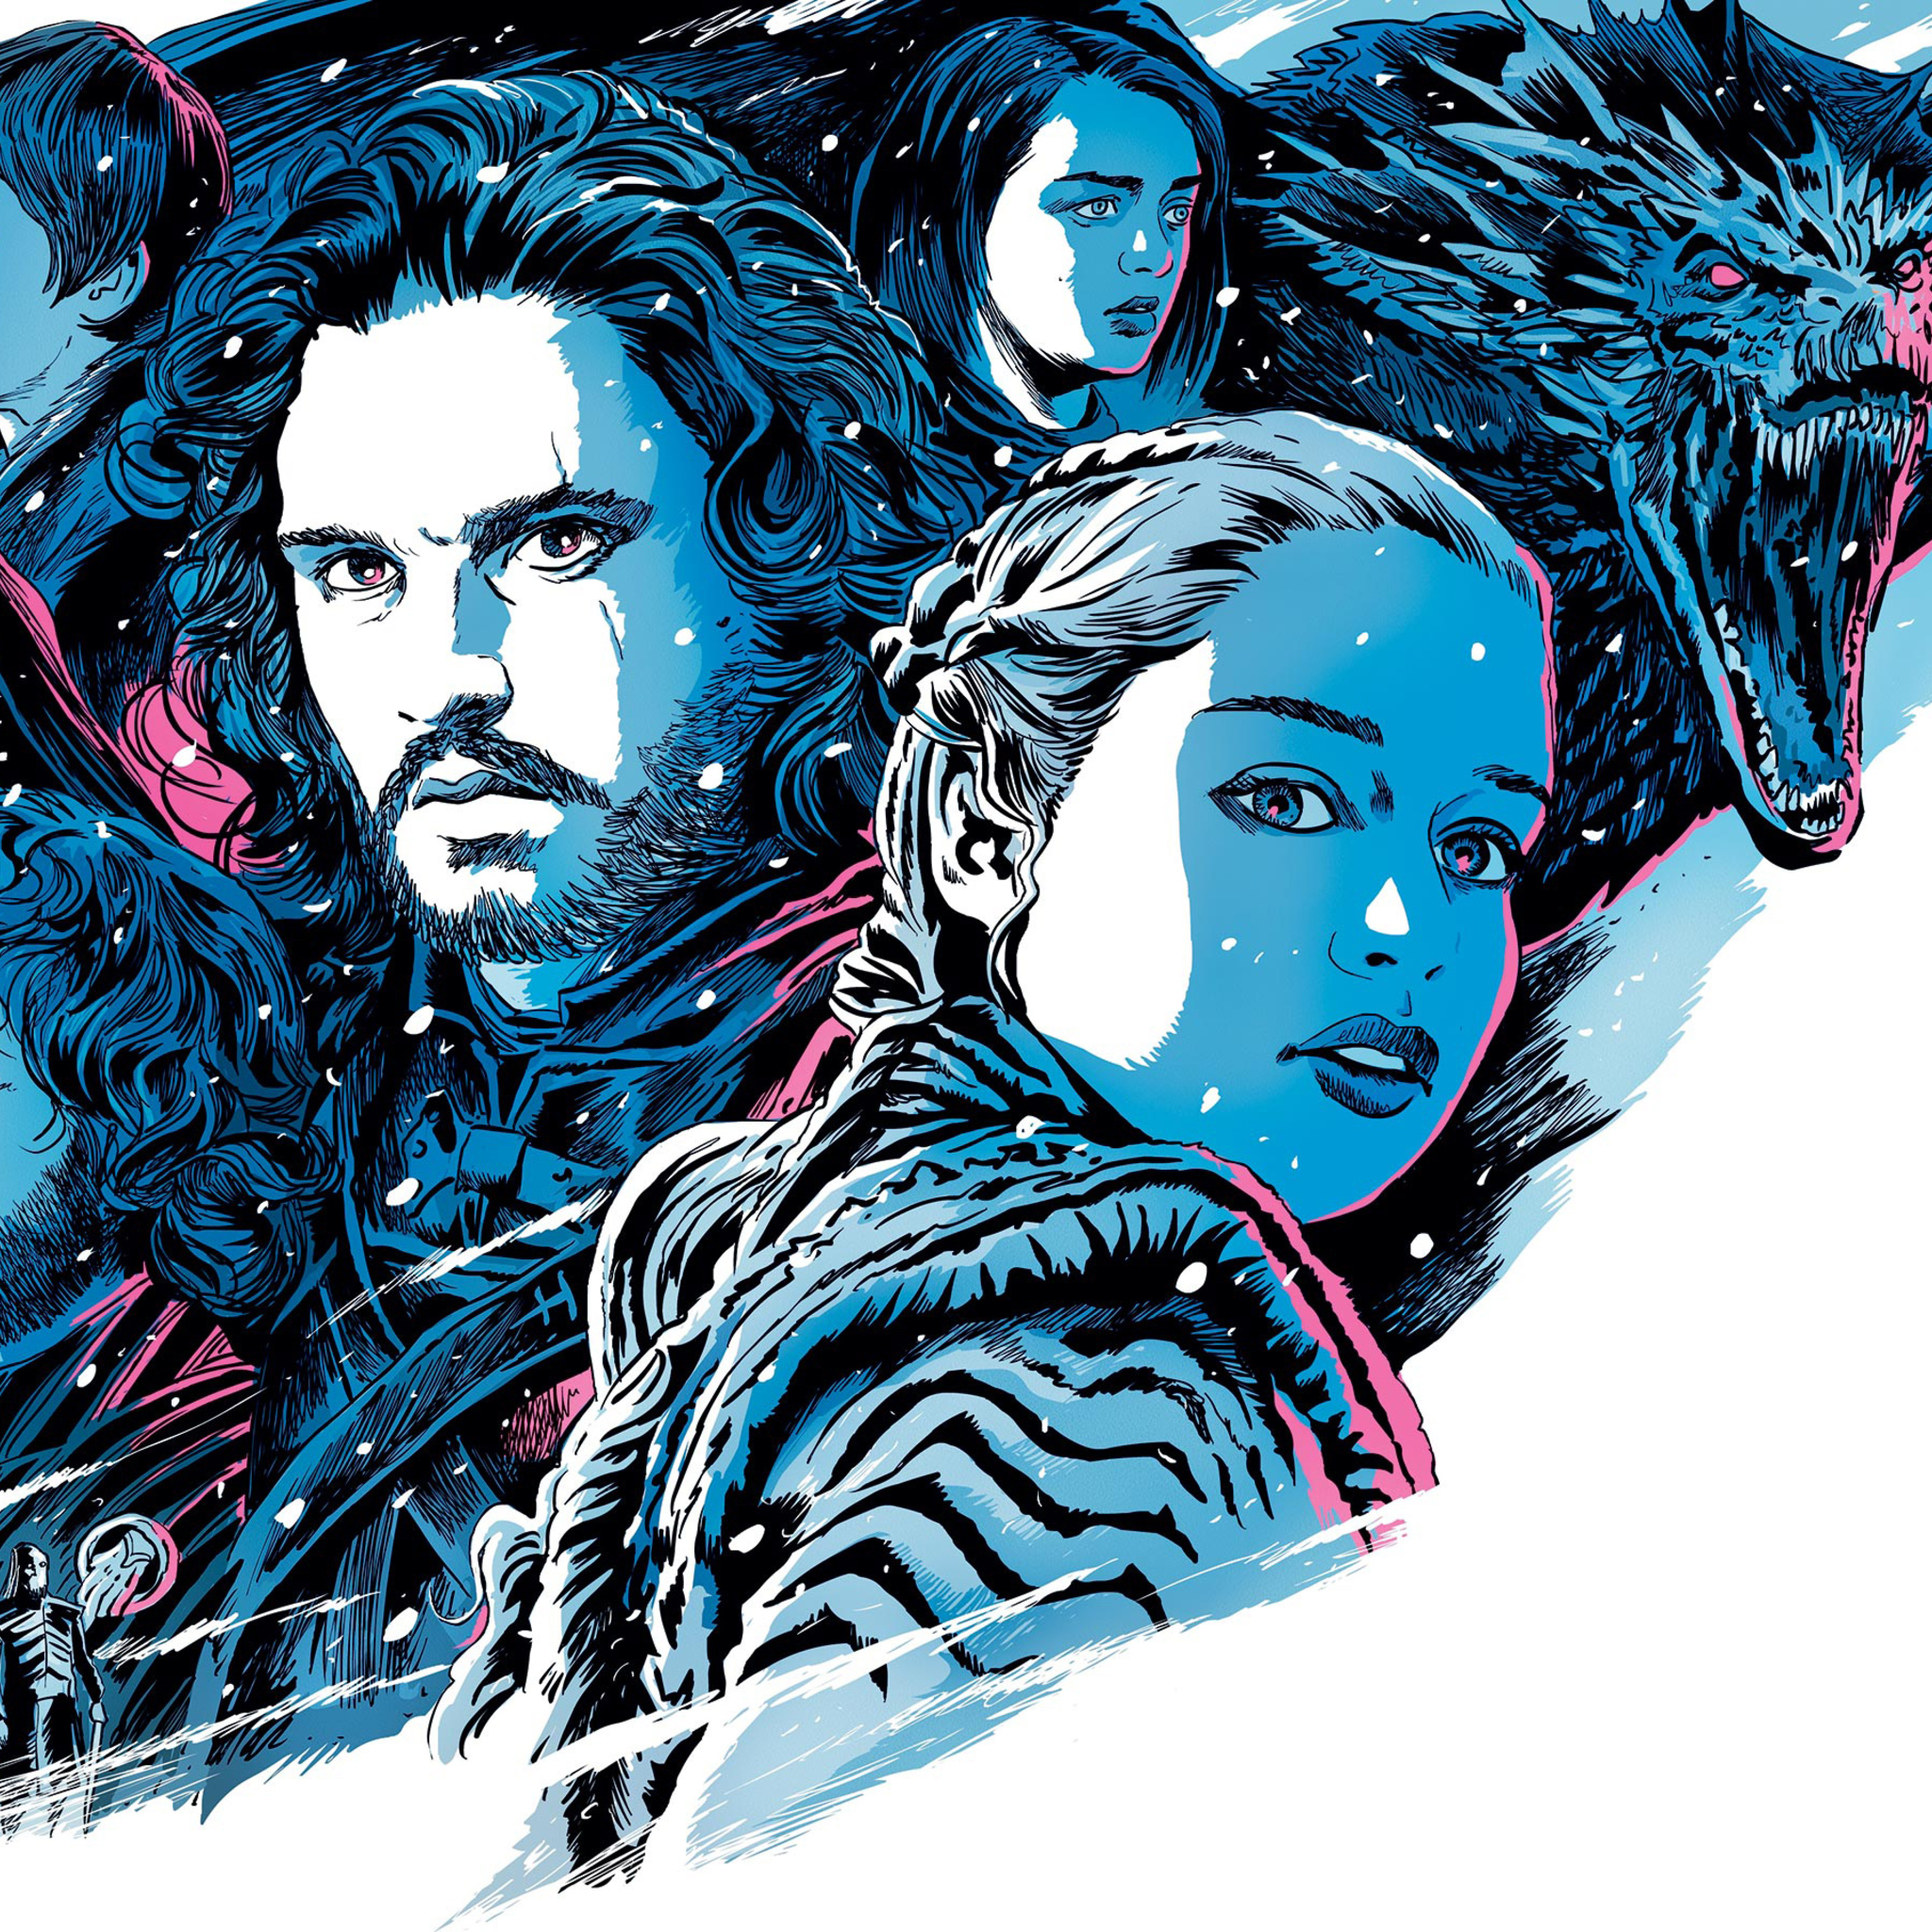 2048x2048 Game Of Thrones Season 8 Illustration Ipad Air Hd 4k Wallpapers Images Backgrounds